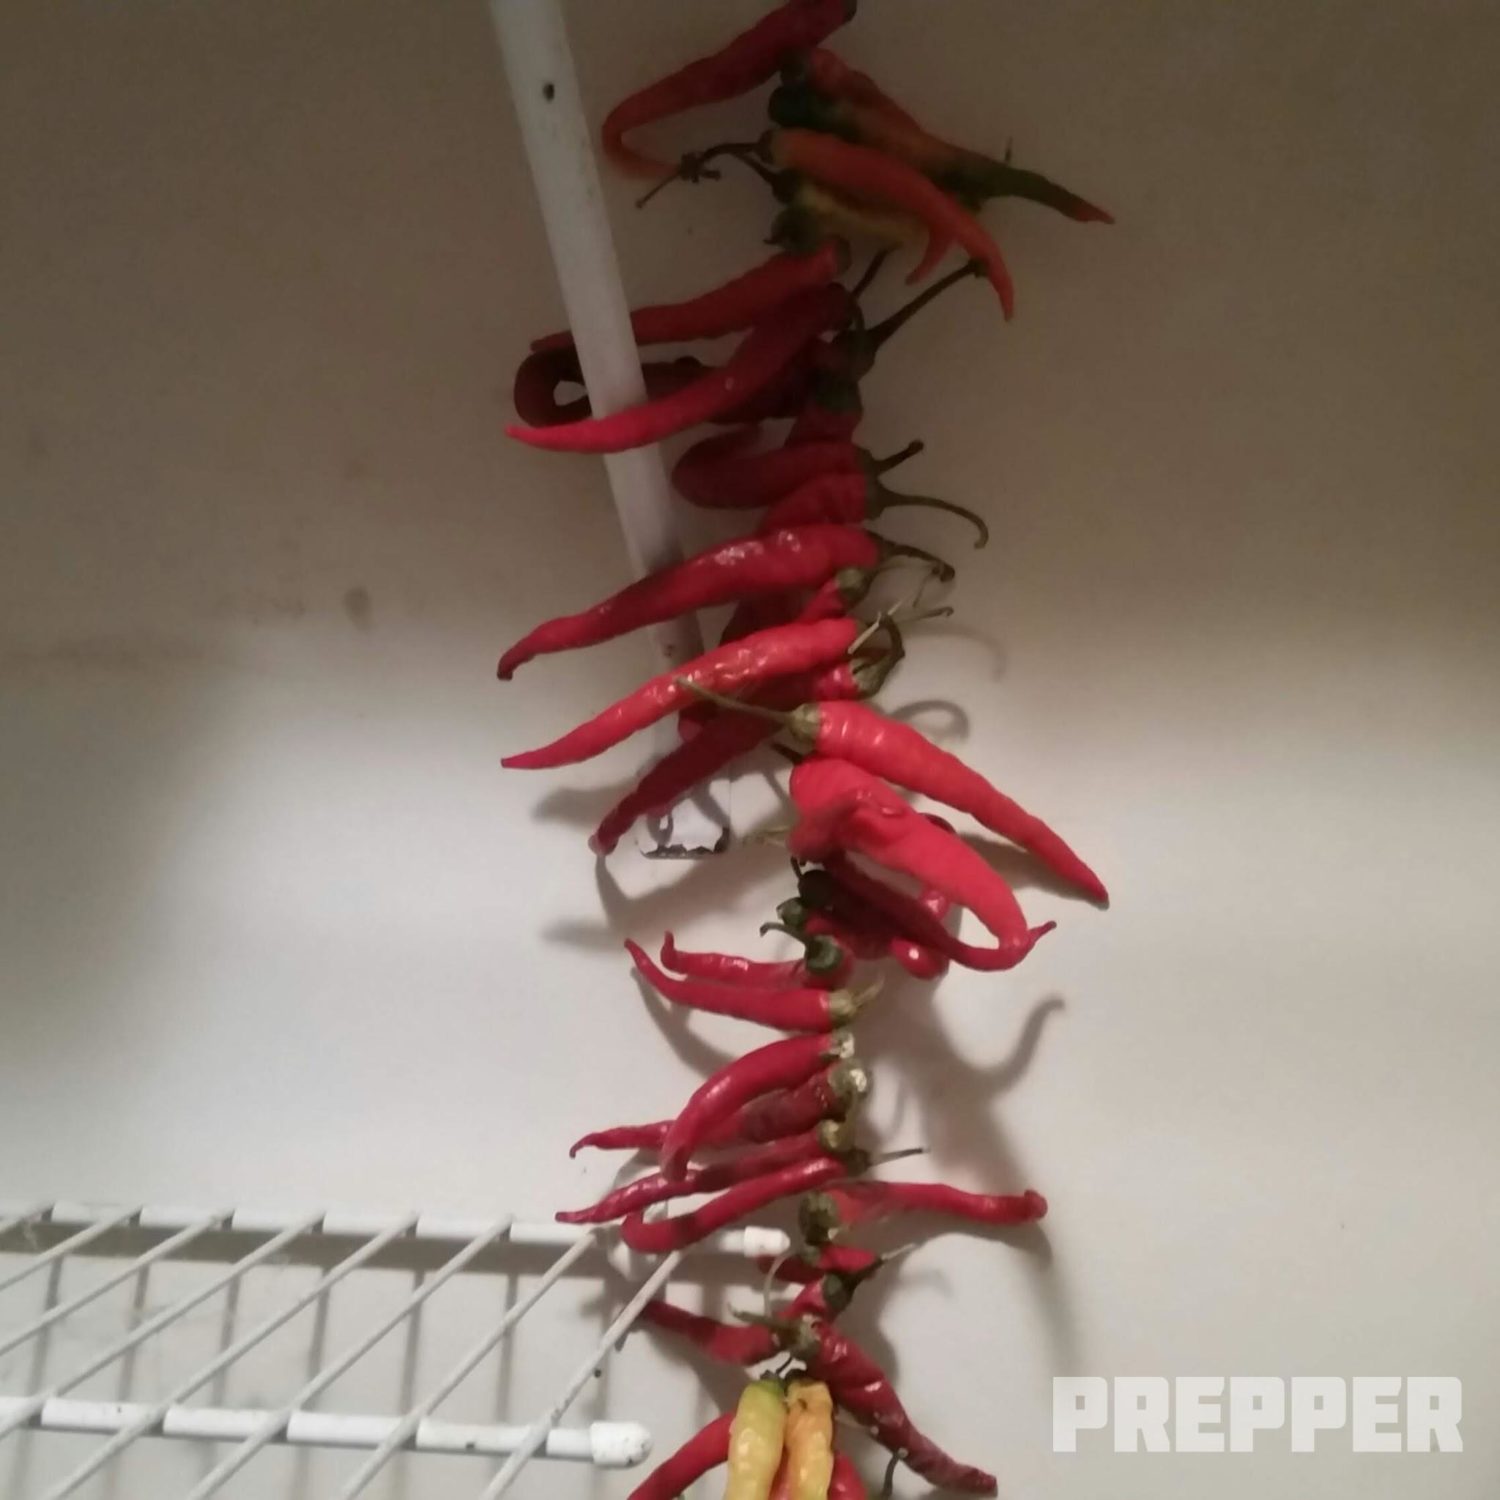 Hang Drying Peppers